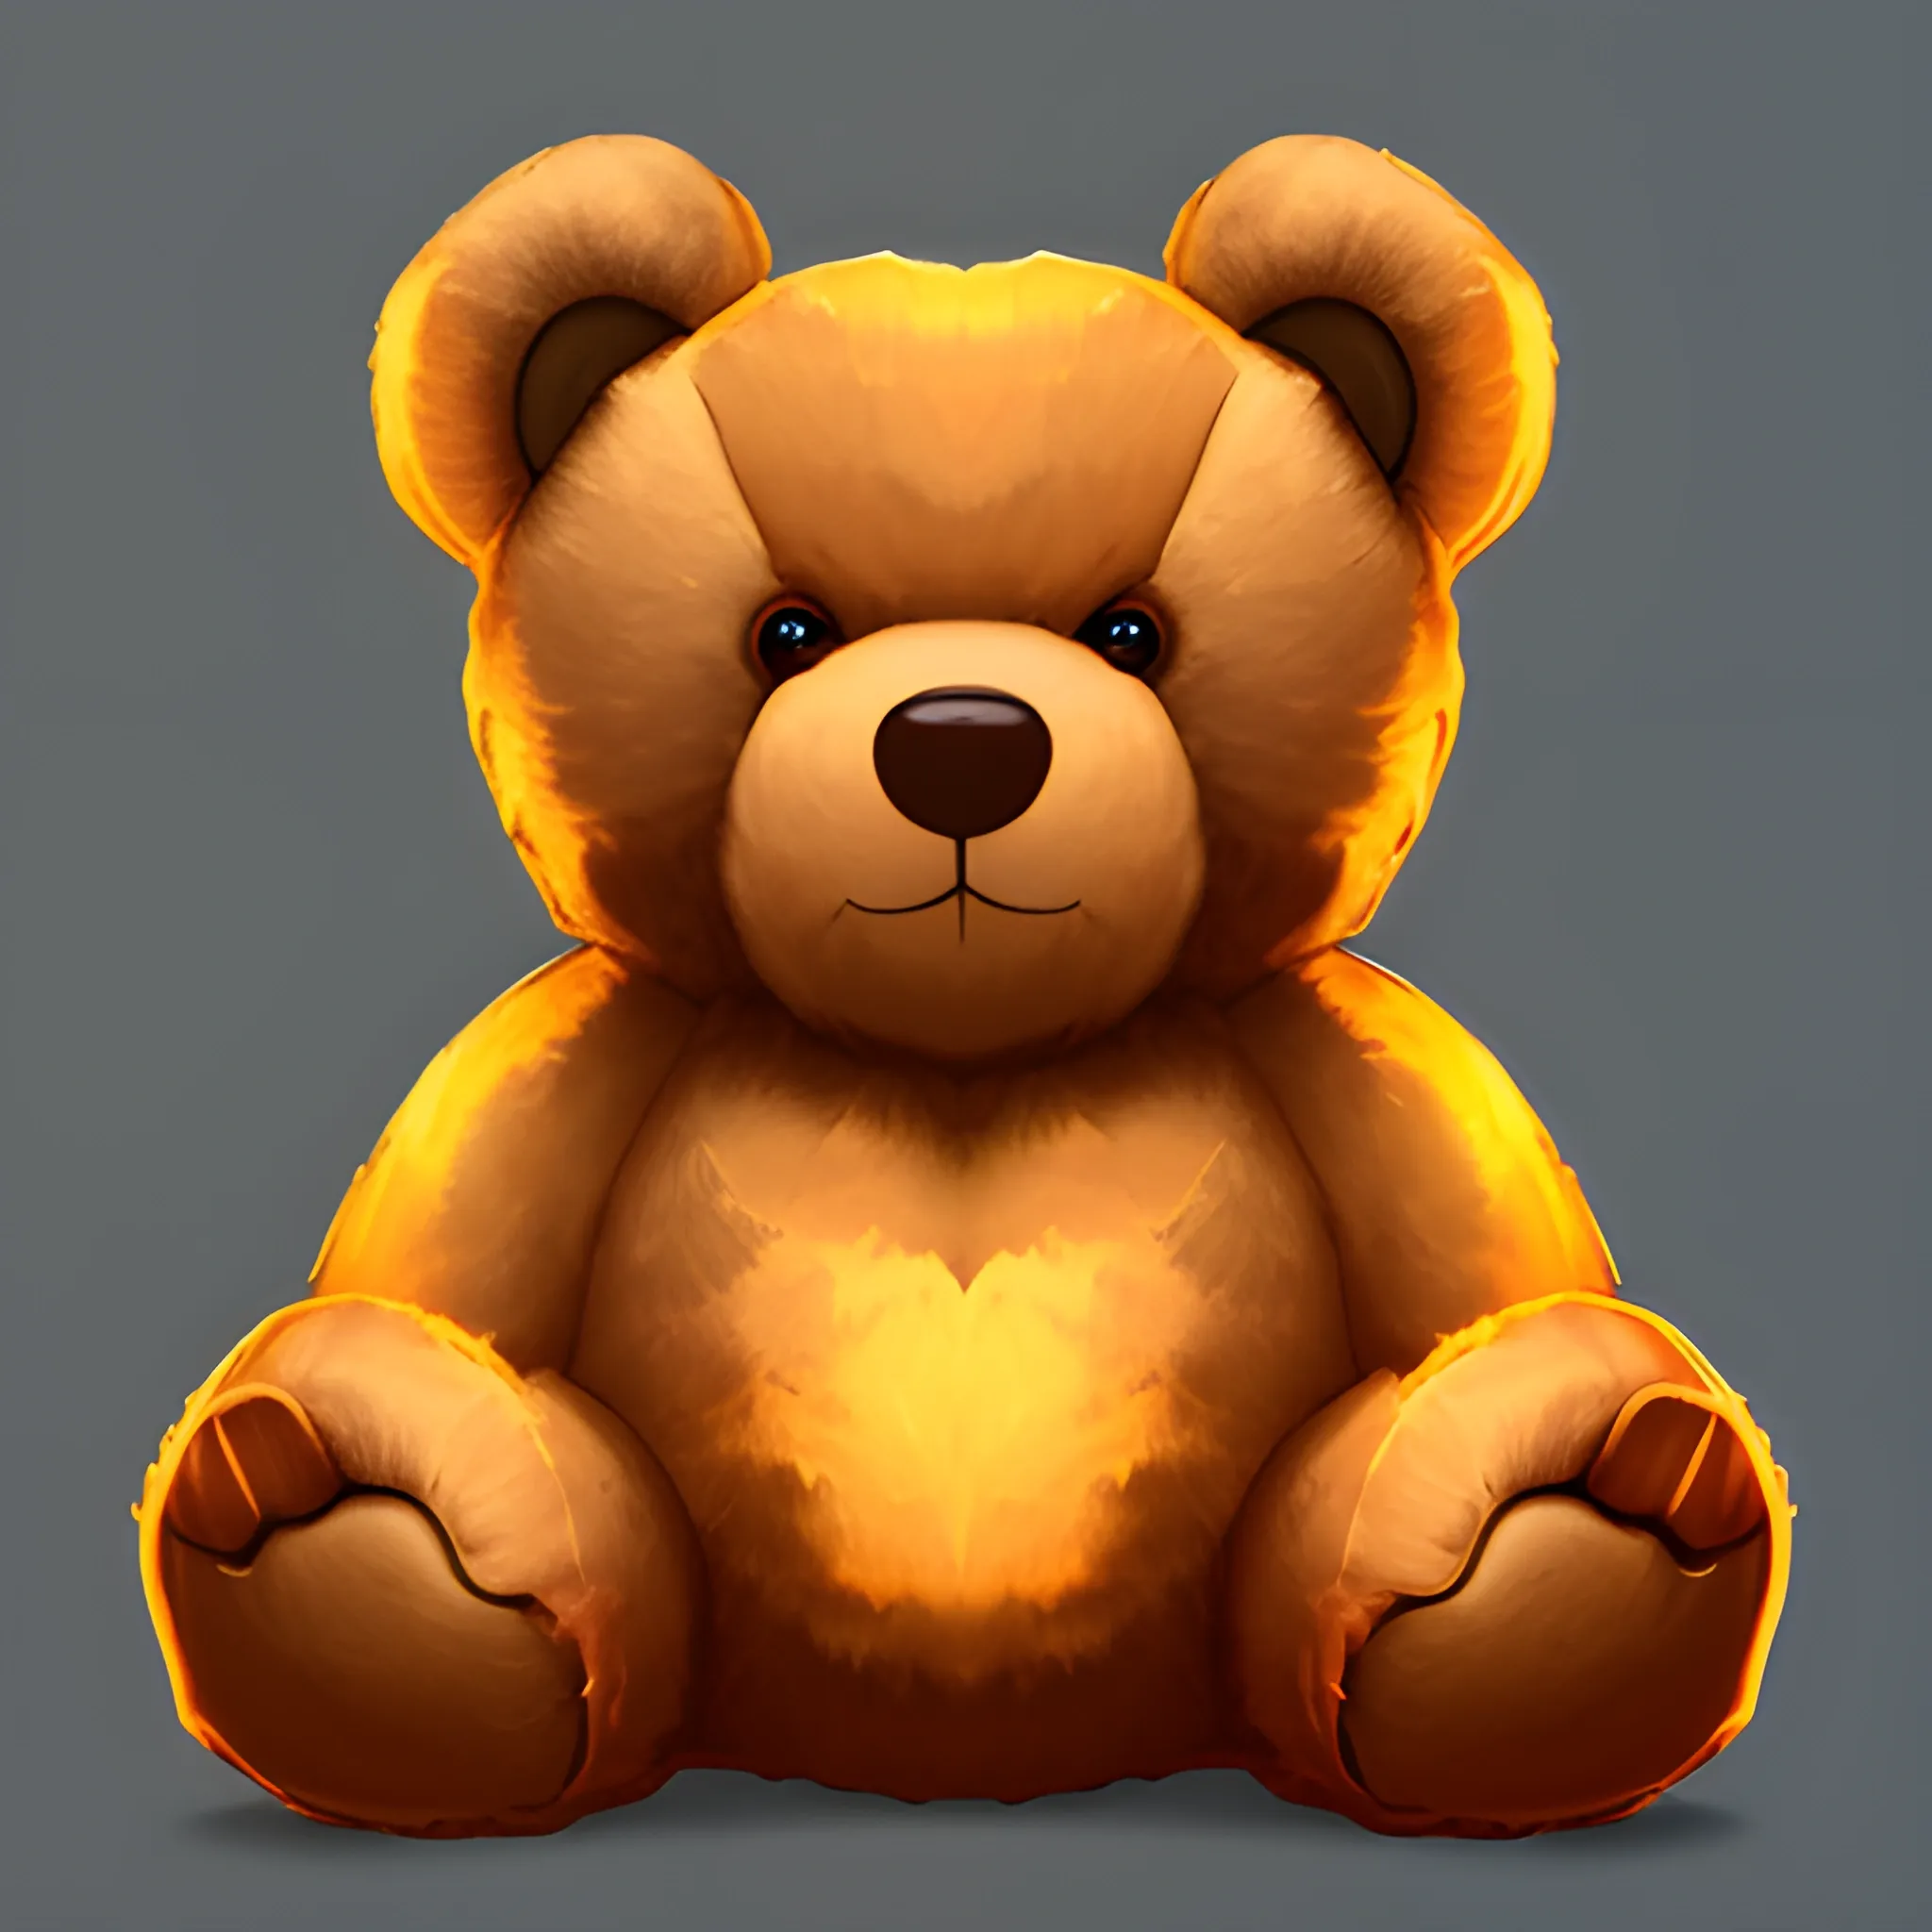 illustration of small whole teddy bear with three-quarter view looking to the side with side light, digital painting style with warm colors